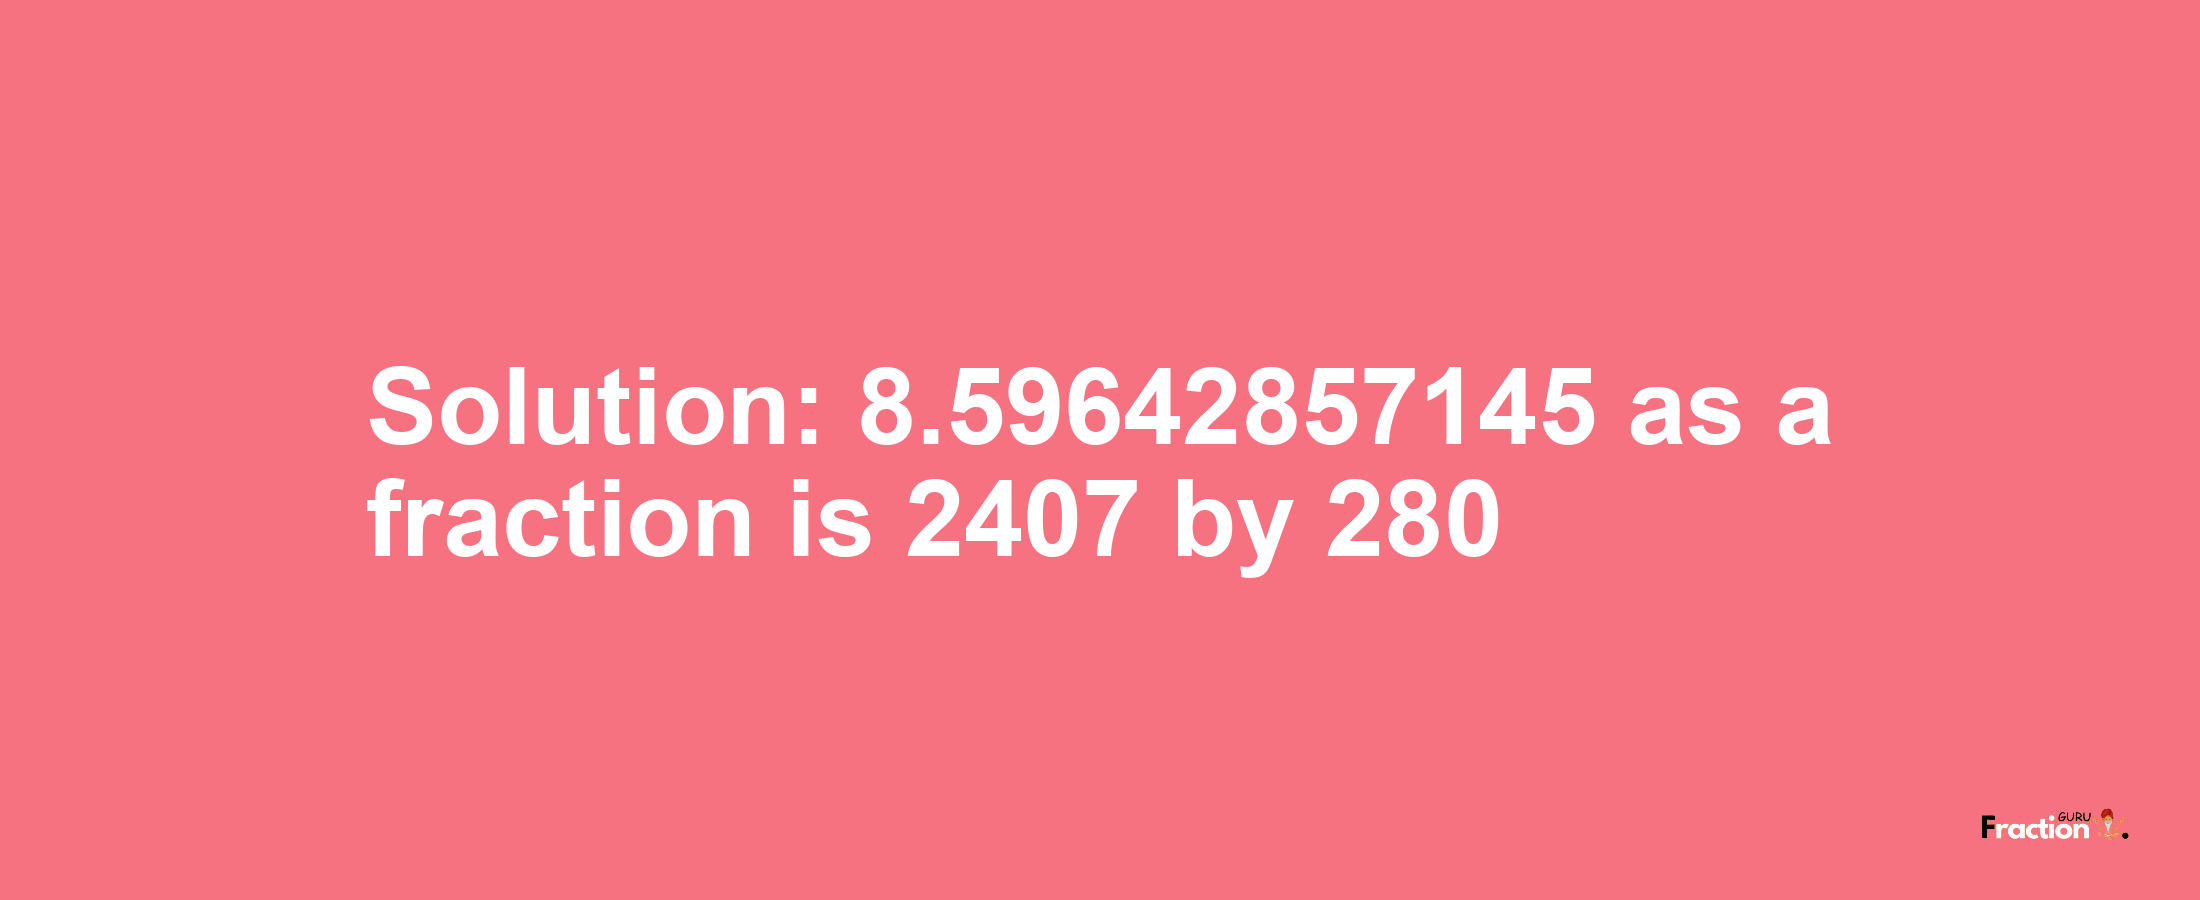 Solution:8.59642857145 as a fraction is 2407/280